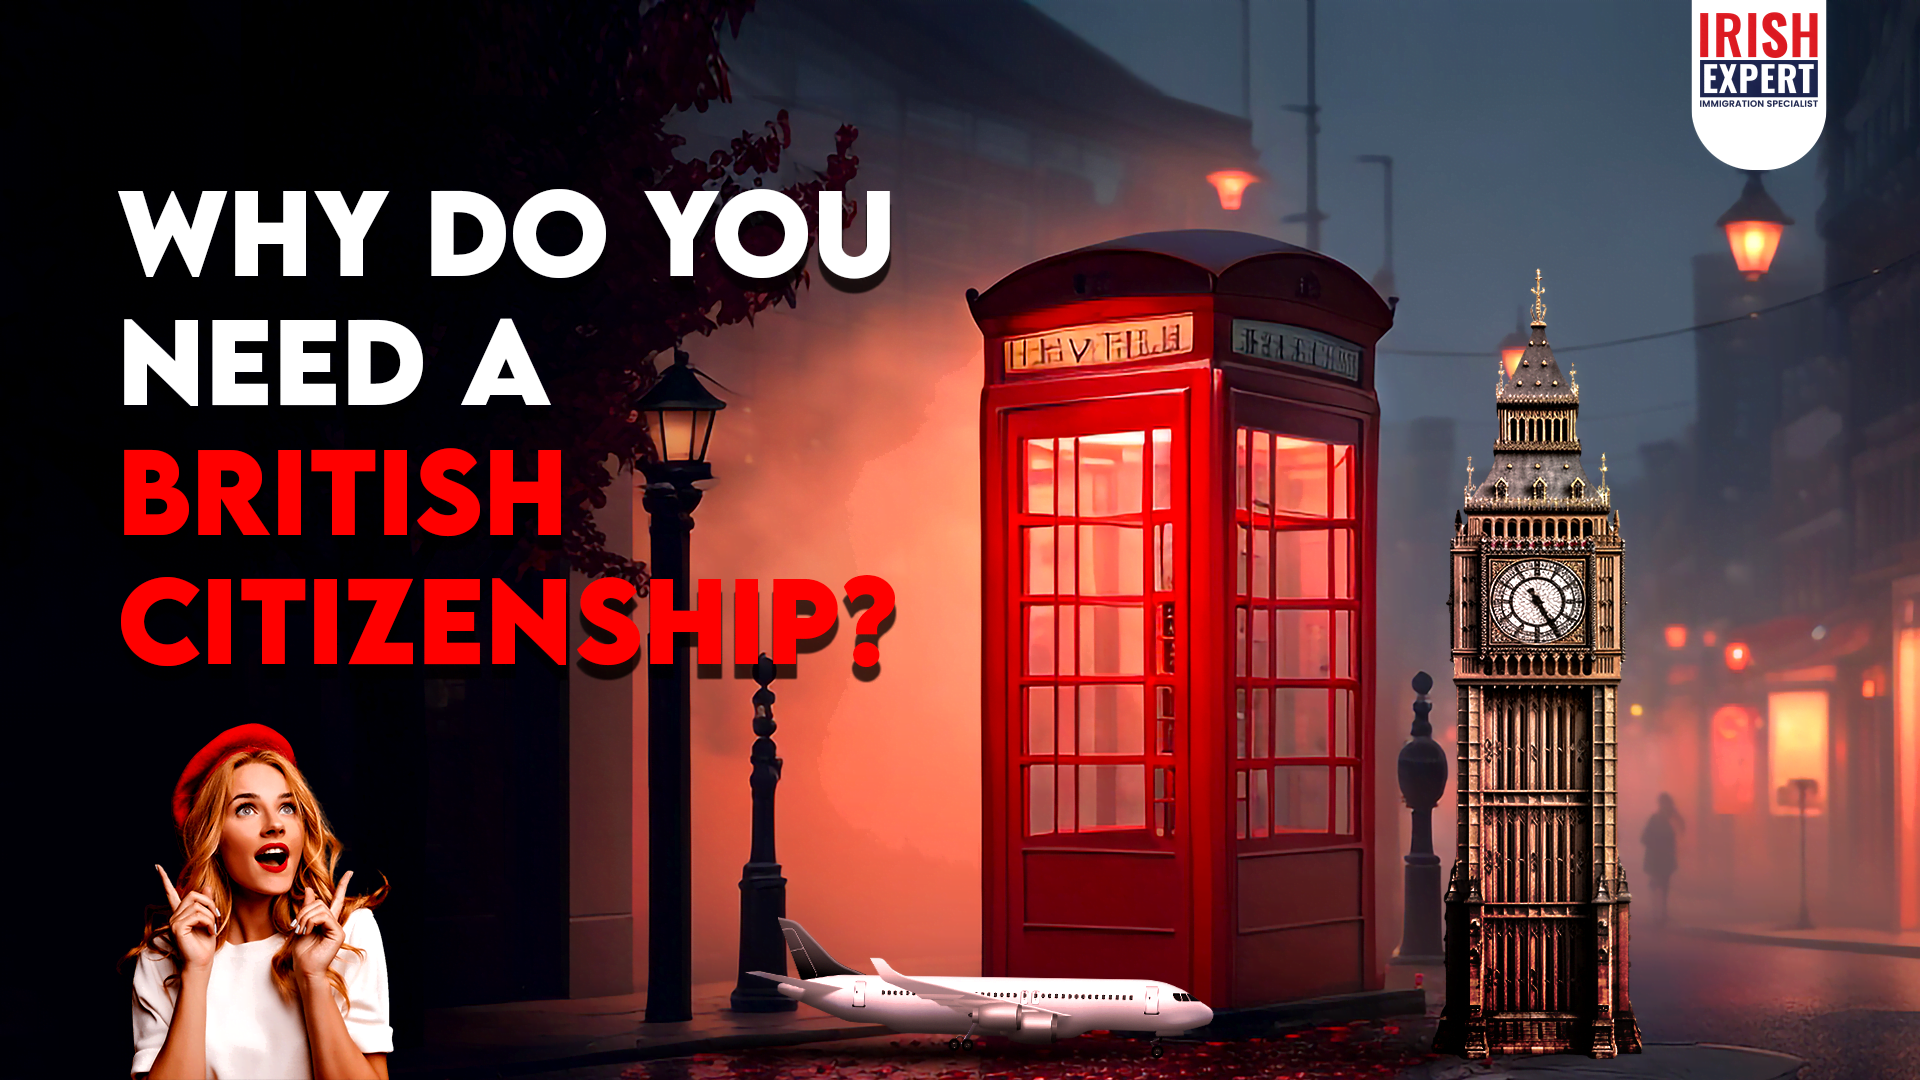 Why do you need a British citizenship?